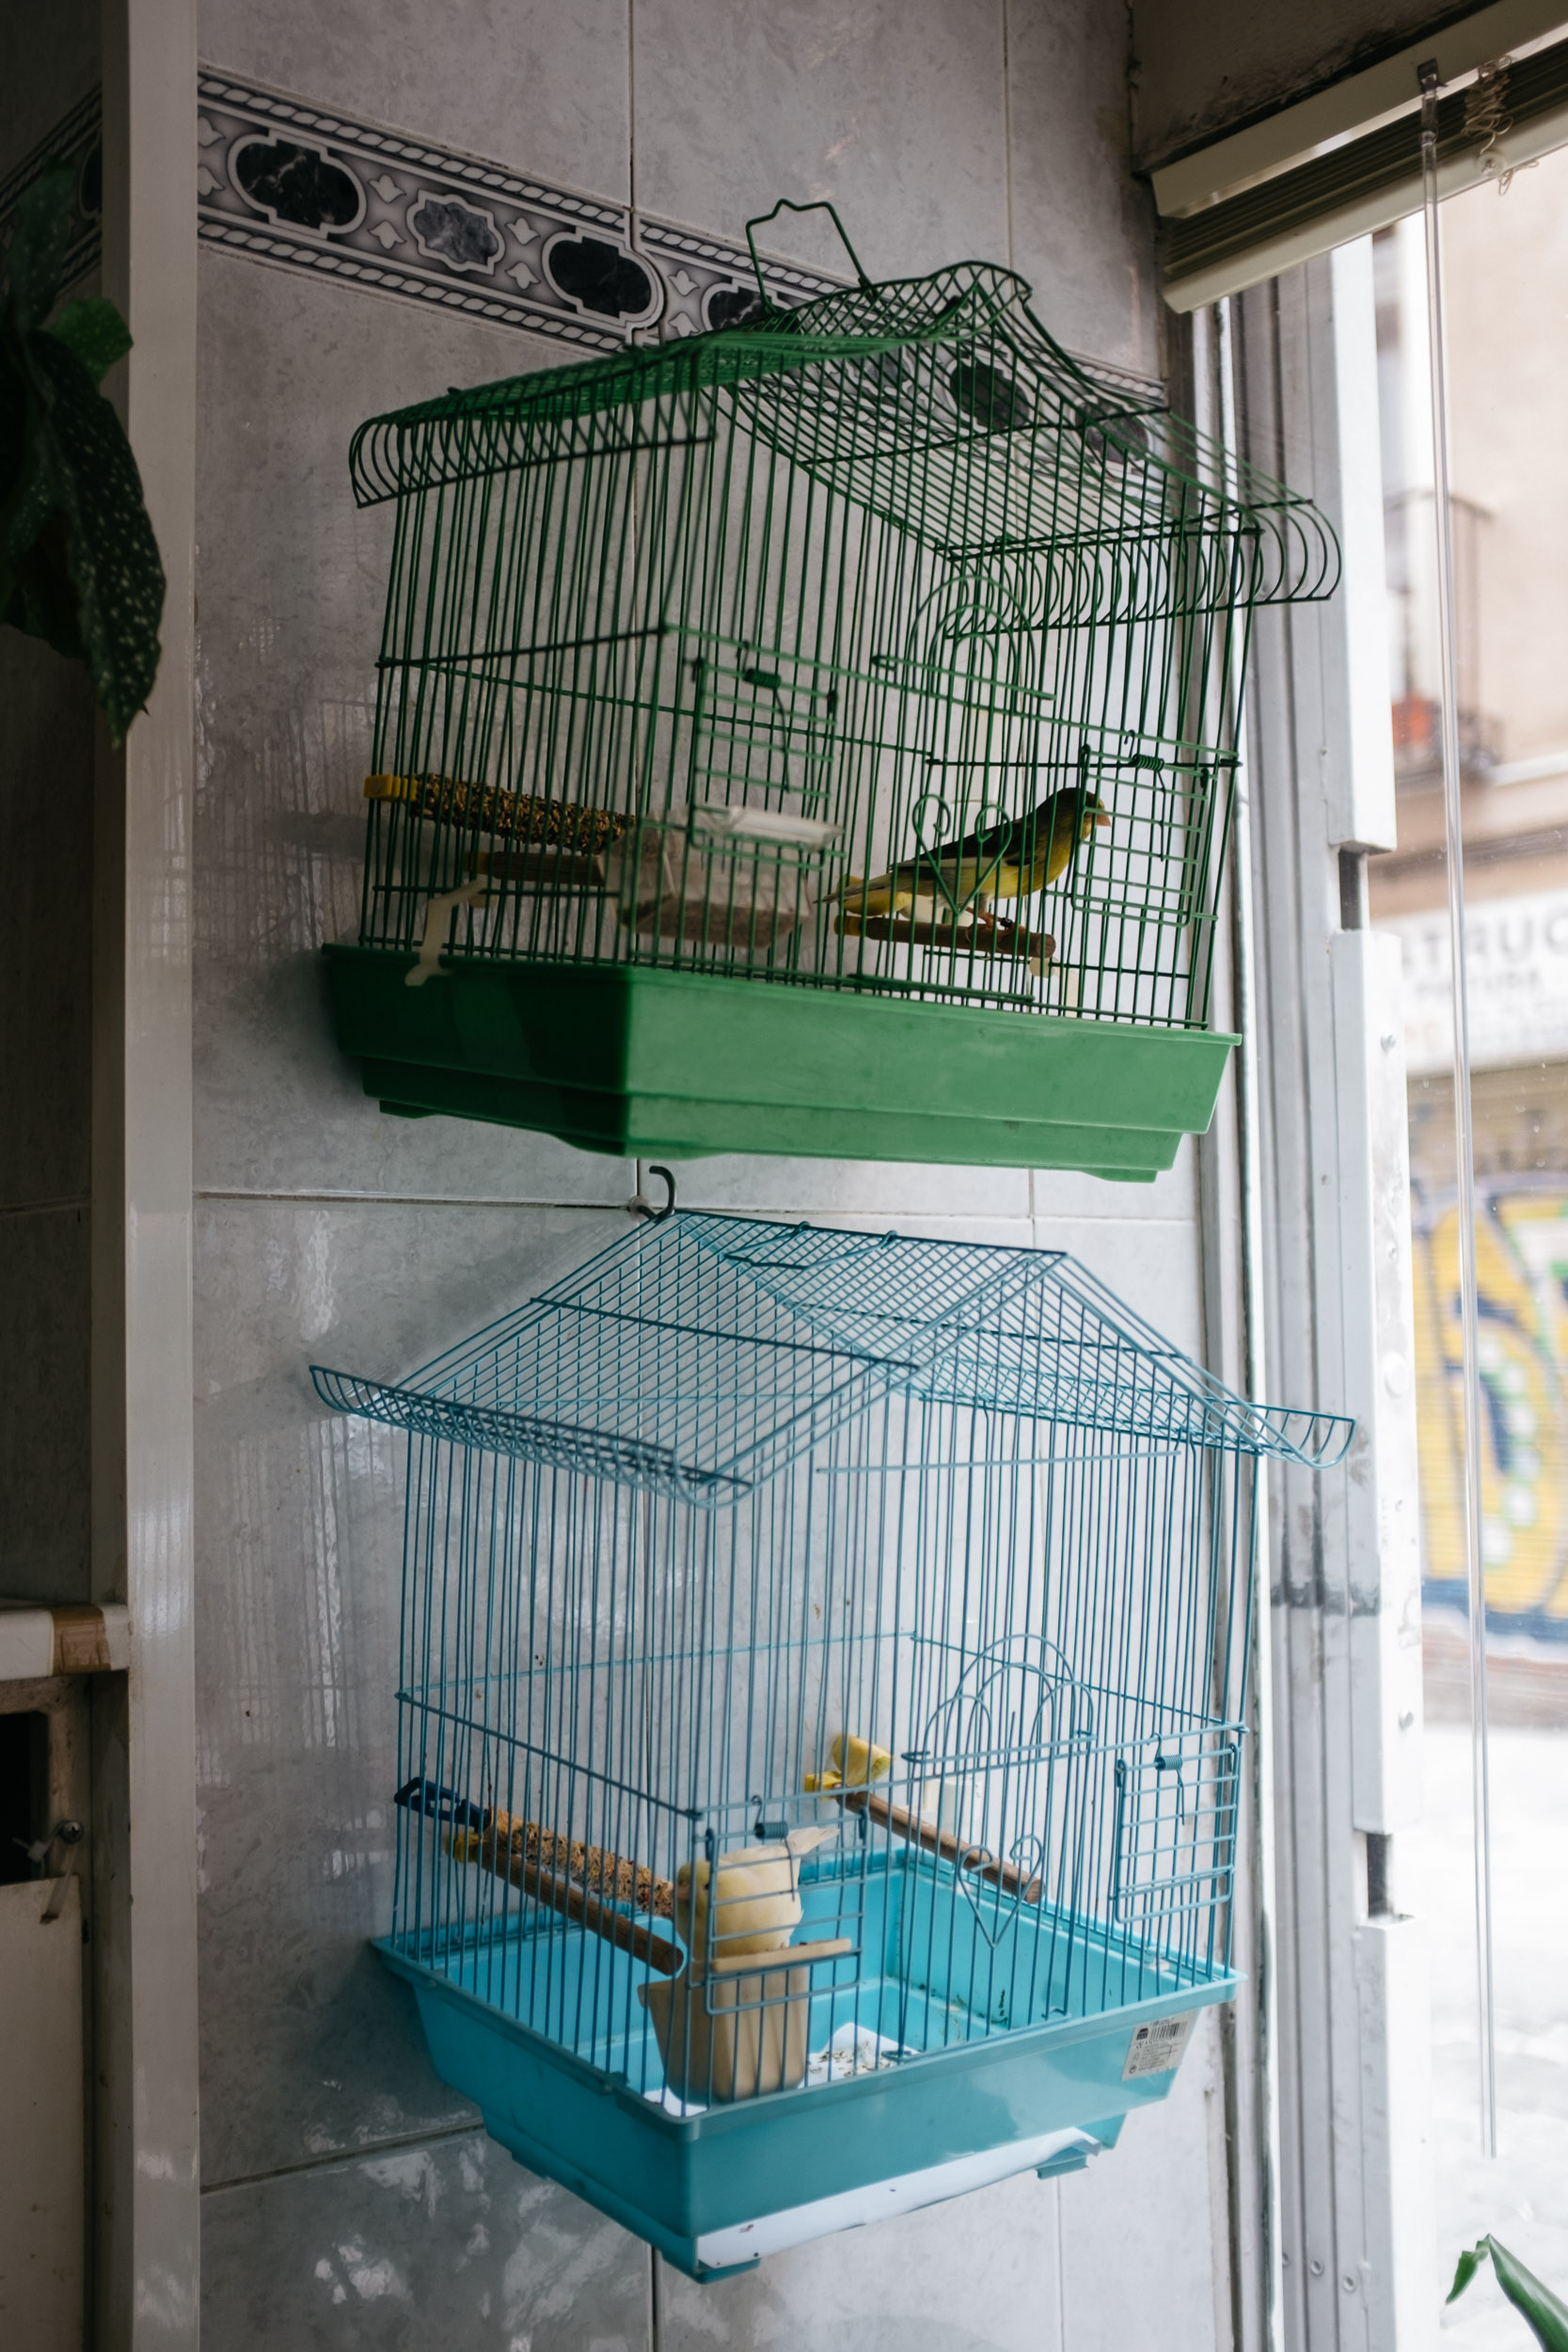 Green and blue birdcages in a window